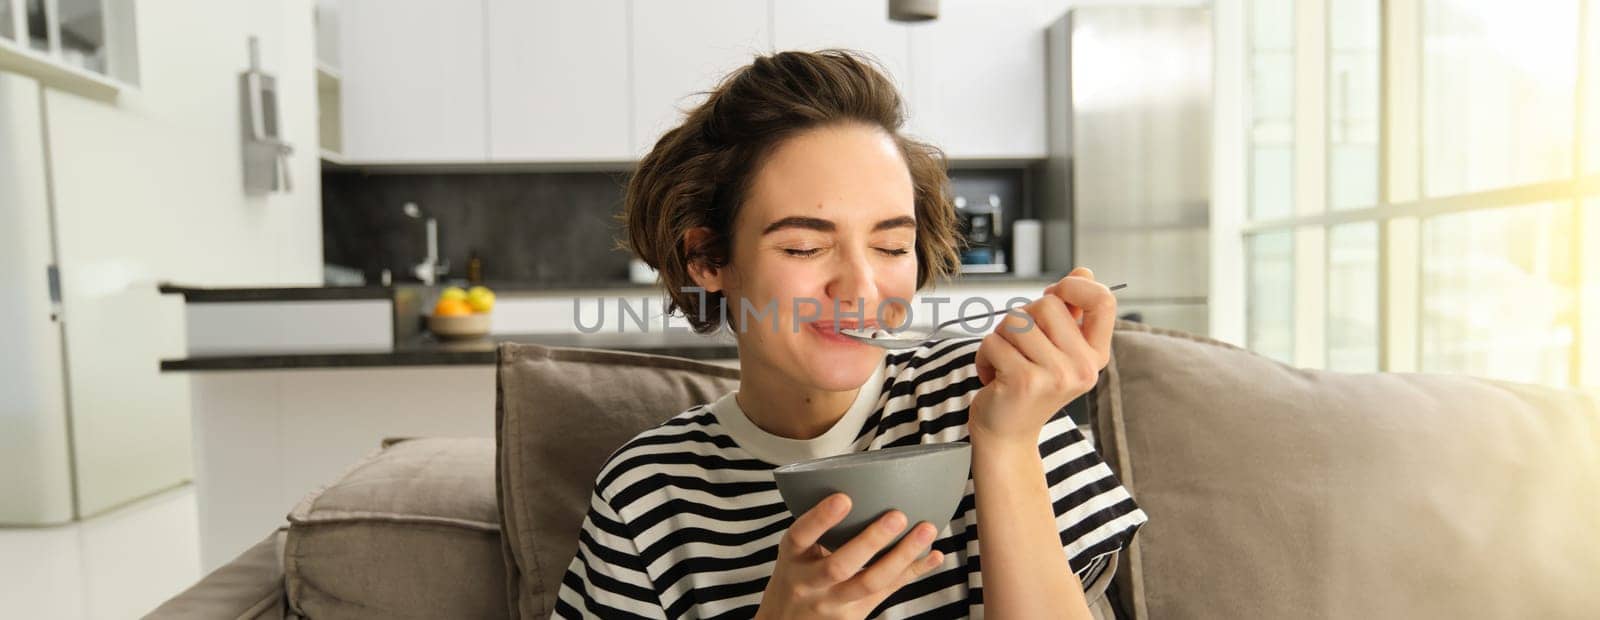 Portrait of happy brunette woman sitting on sofa and enjoying her breakfast, eating cereals, healthy granola in bowl, spending time in living room.